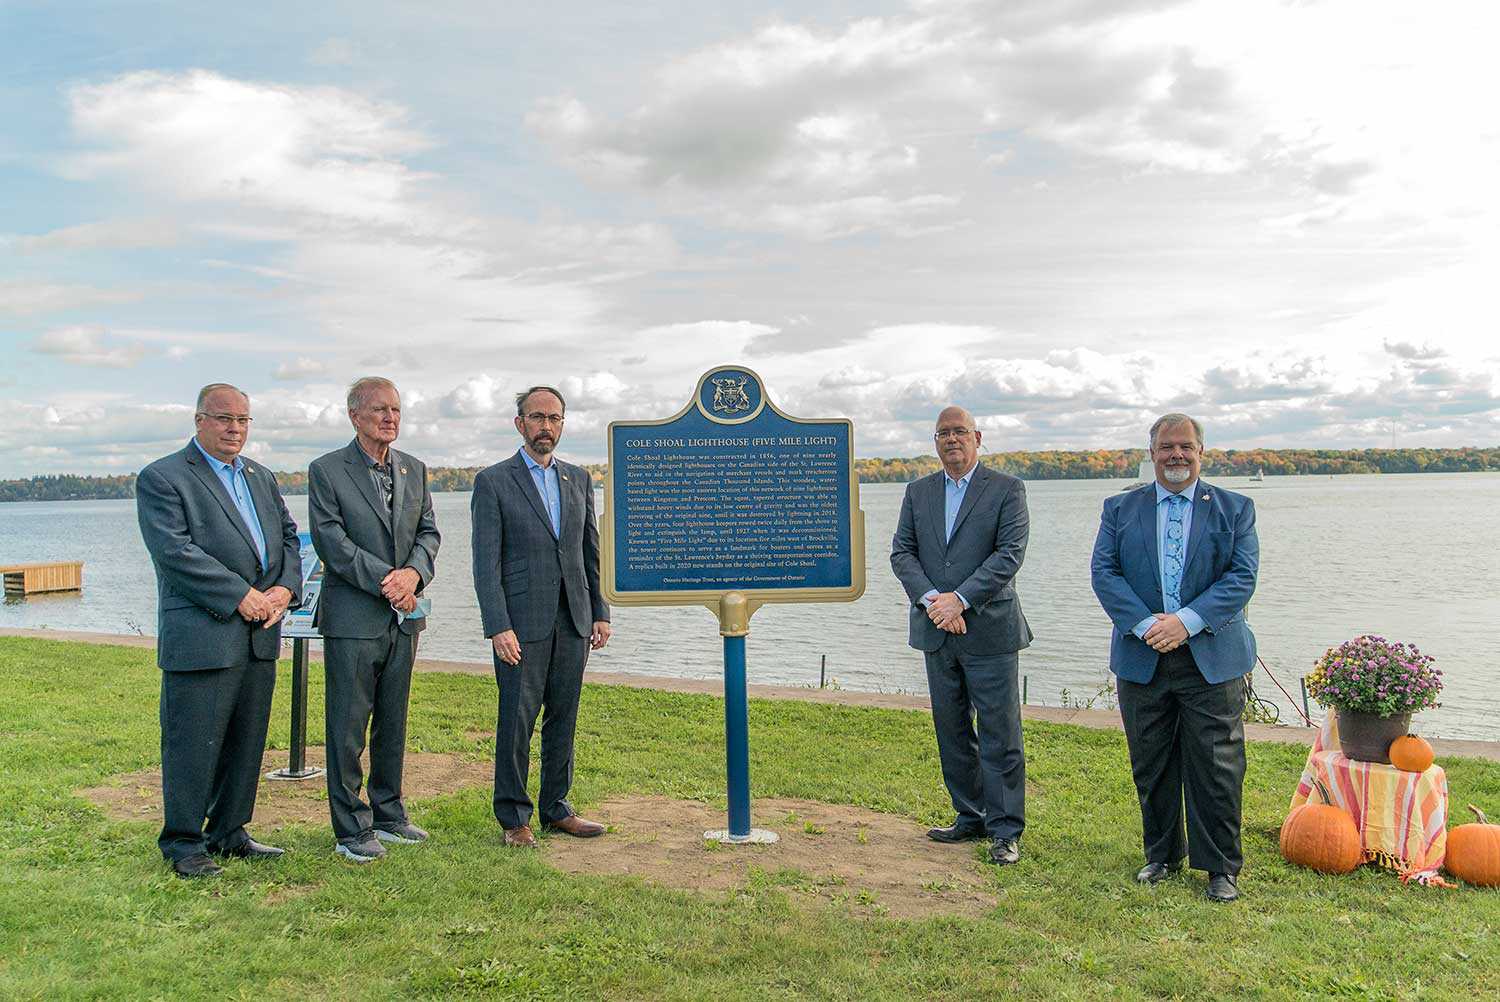 Trust Chair John Ecker with local representatives from the Cole Shoal plaque unveiling event in 2021